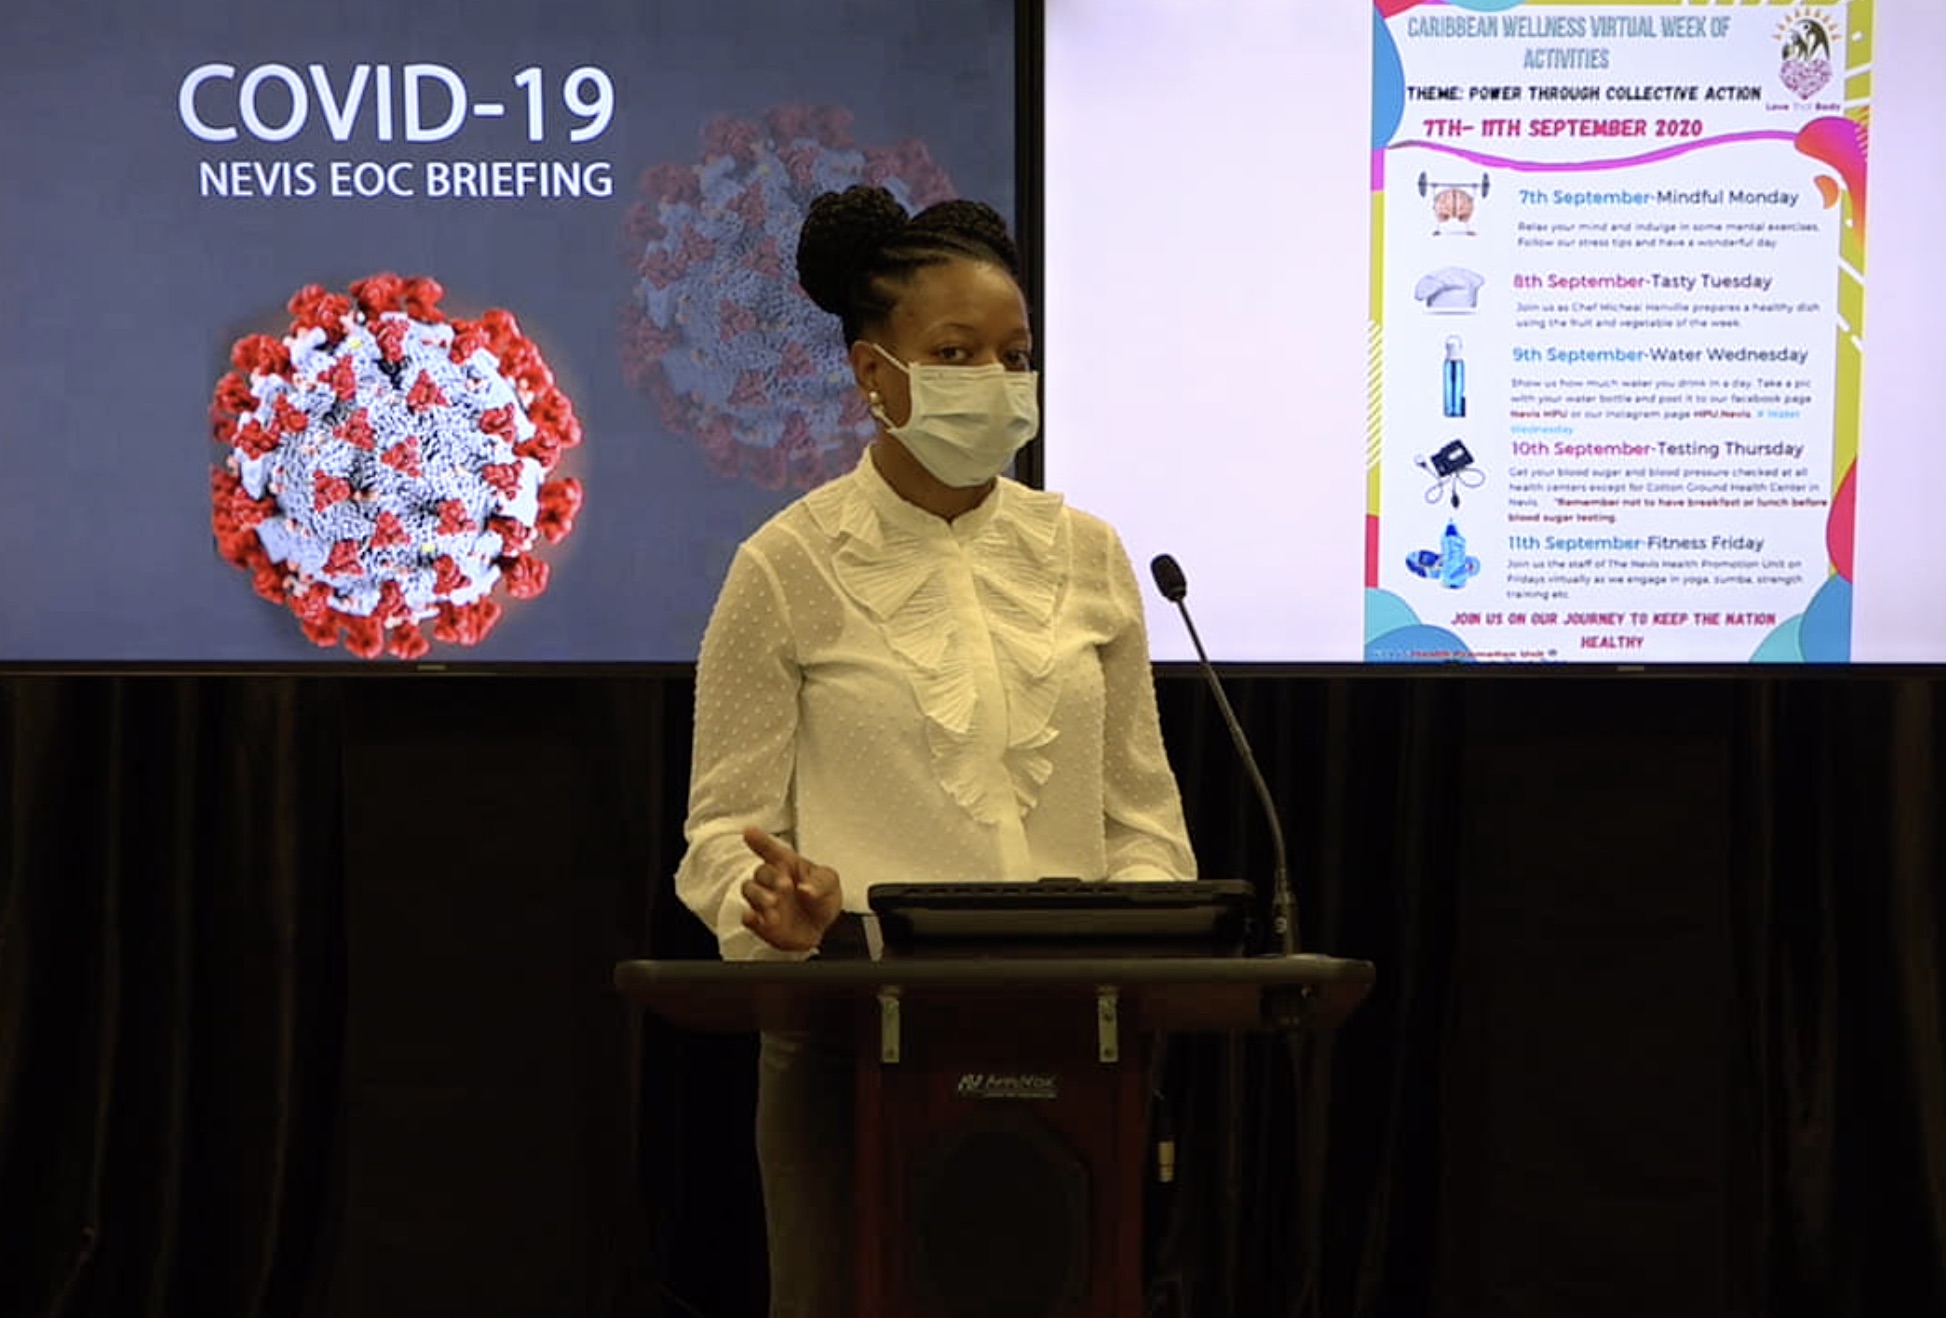 Ms. Shevanee Nisbett, Senior Health Educator at the Nevis Health Promotion Unit making a presentation at the Nevis COVID-19 Emergency Operations Centre Briefing on August 31, 2020